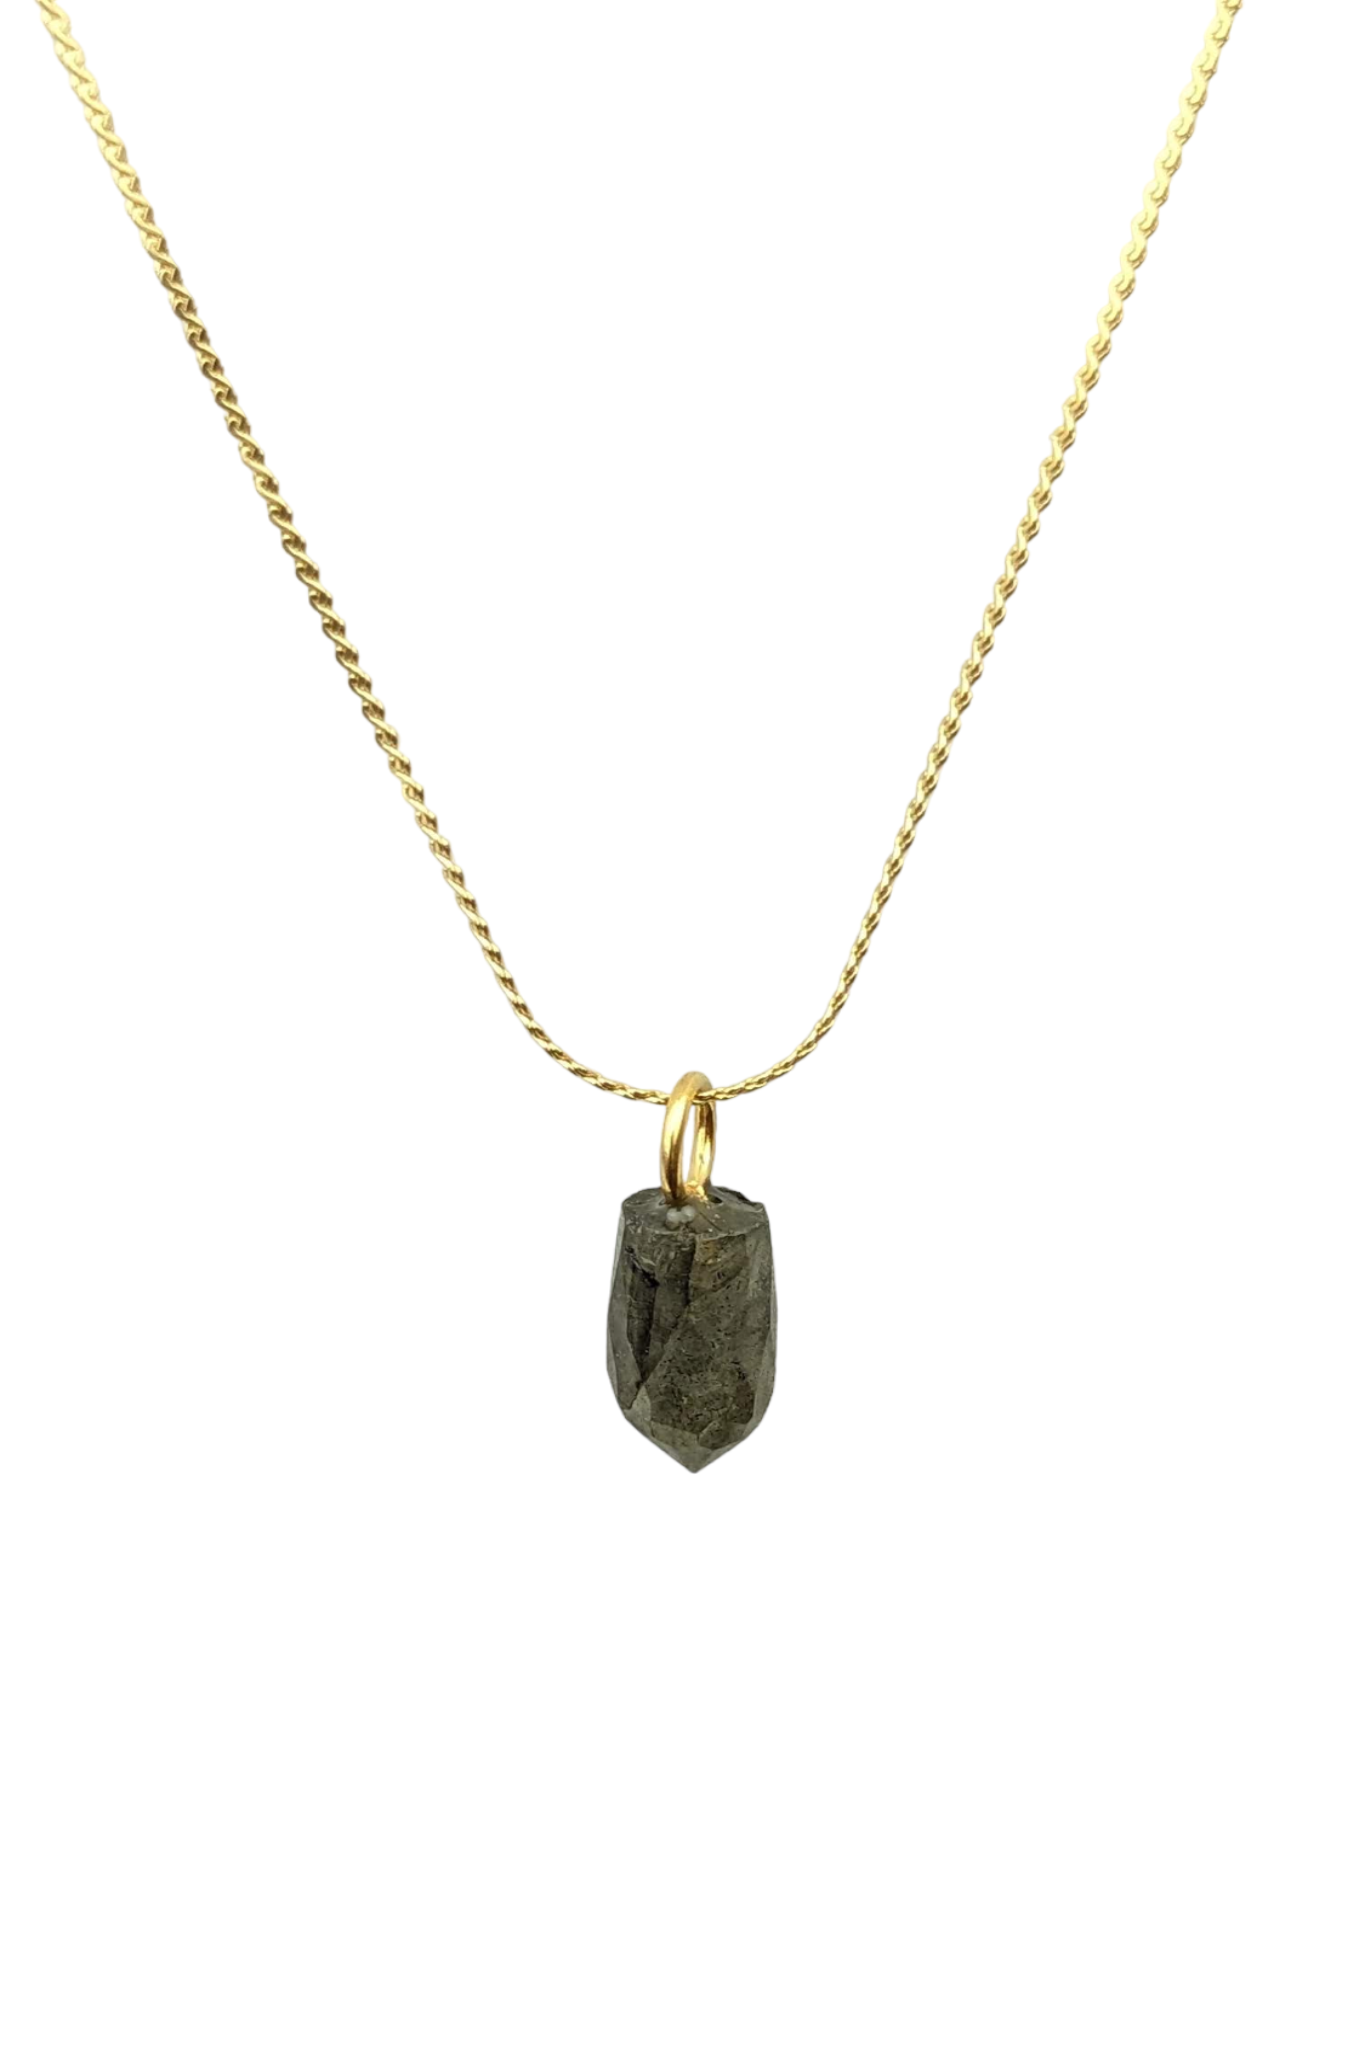 Protection - Aura Shield - Crown Chakra necklace pendant stay gold by mme bovary